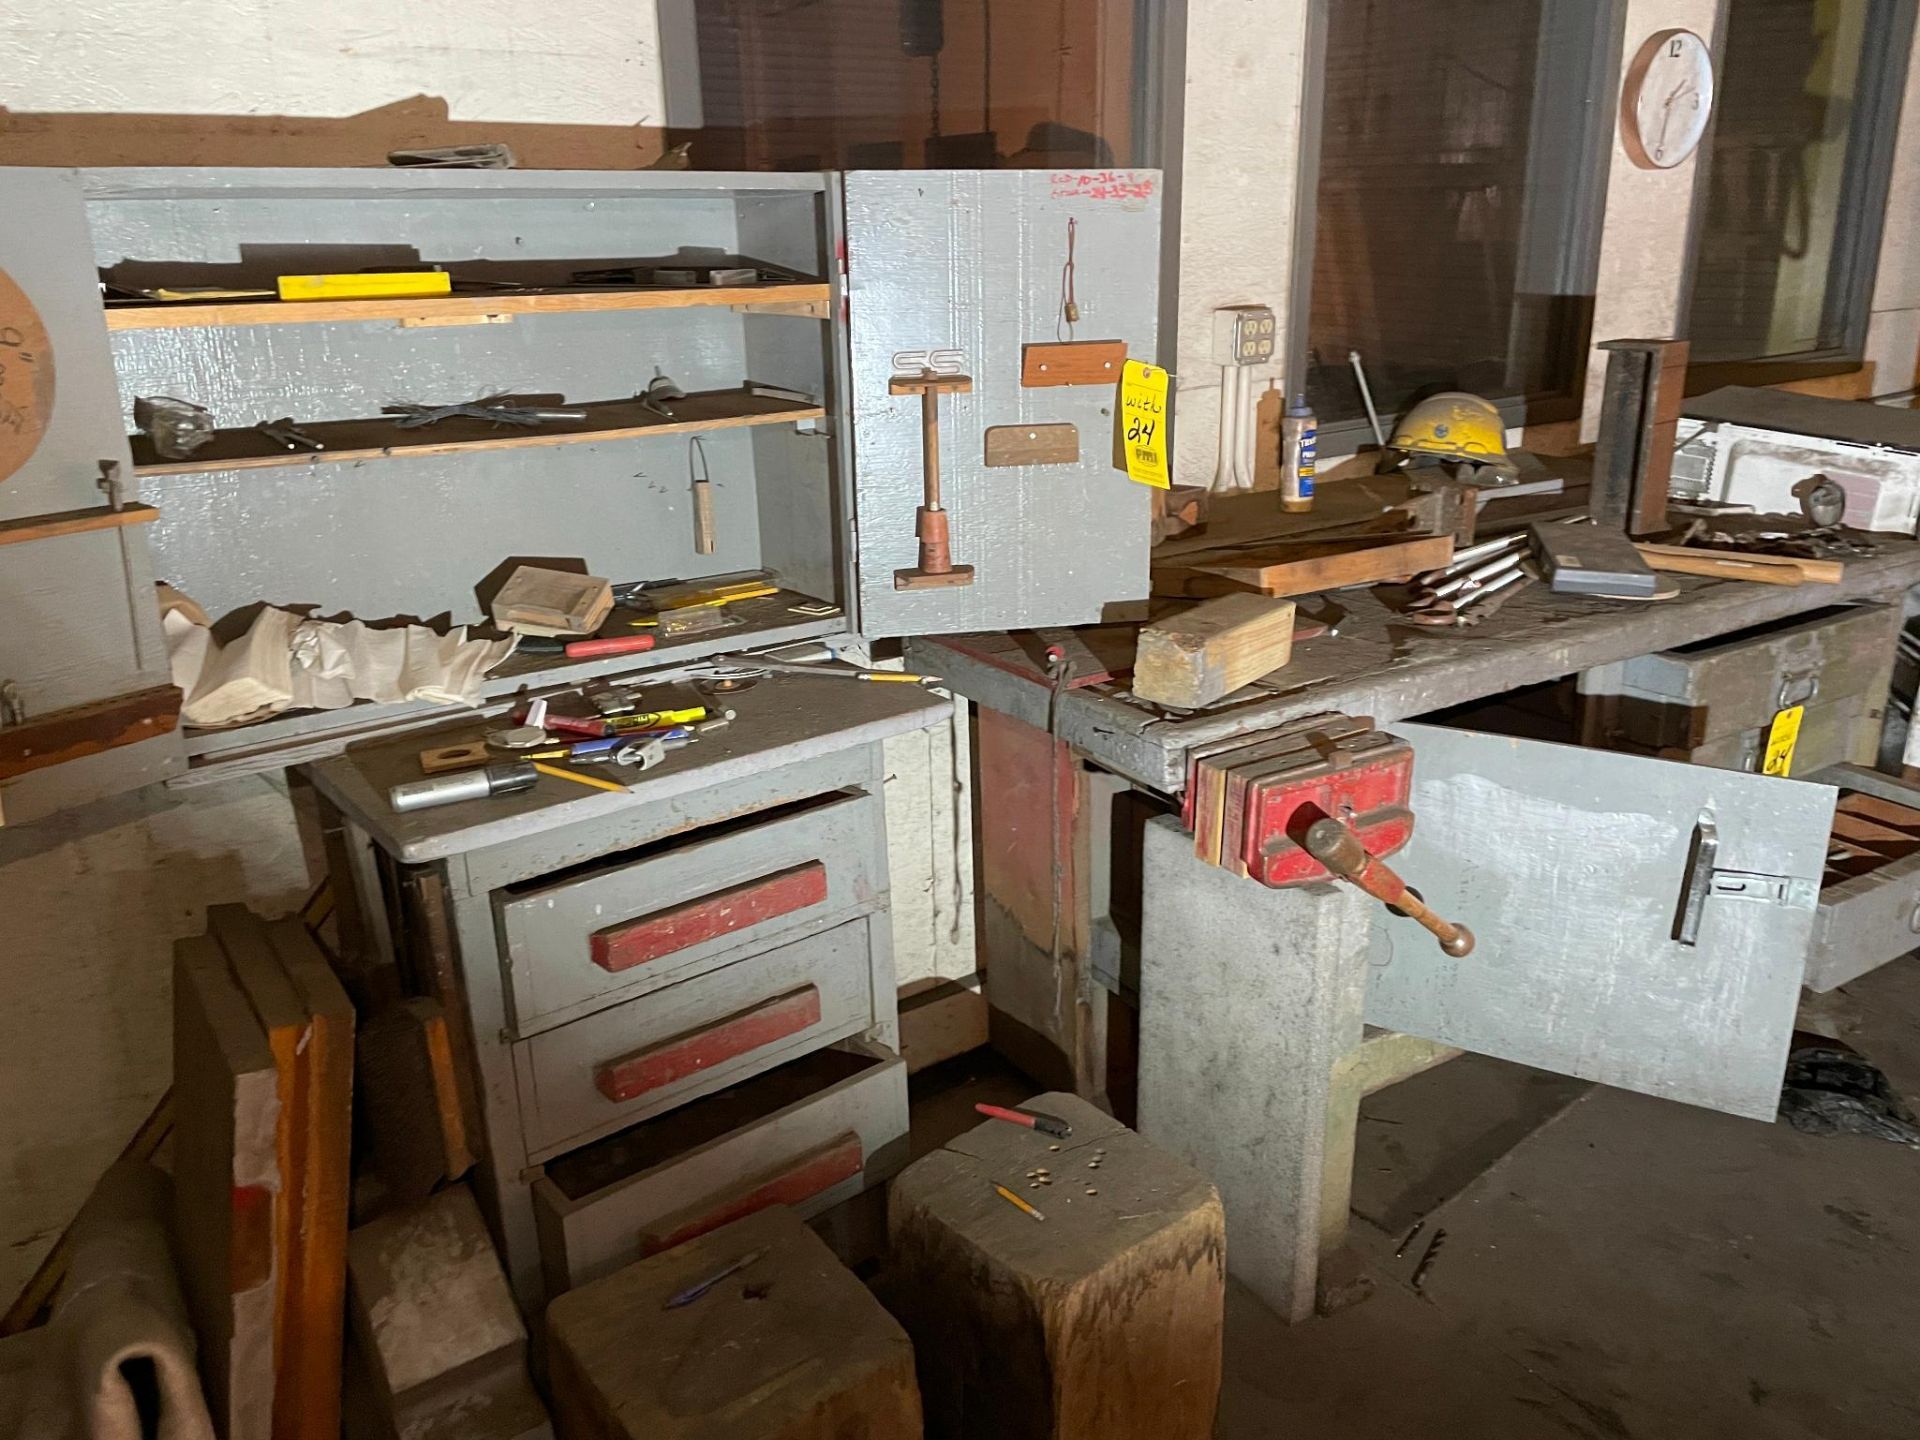 LOT OF WORK BENCHES & CABINETS, w/ contents: bar clamps, eye bolts, wood screws, lag screws, - Image 11 of 11